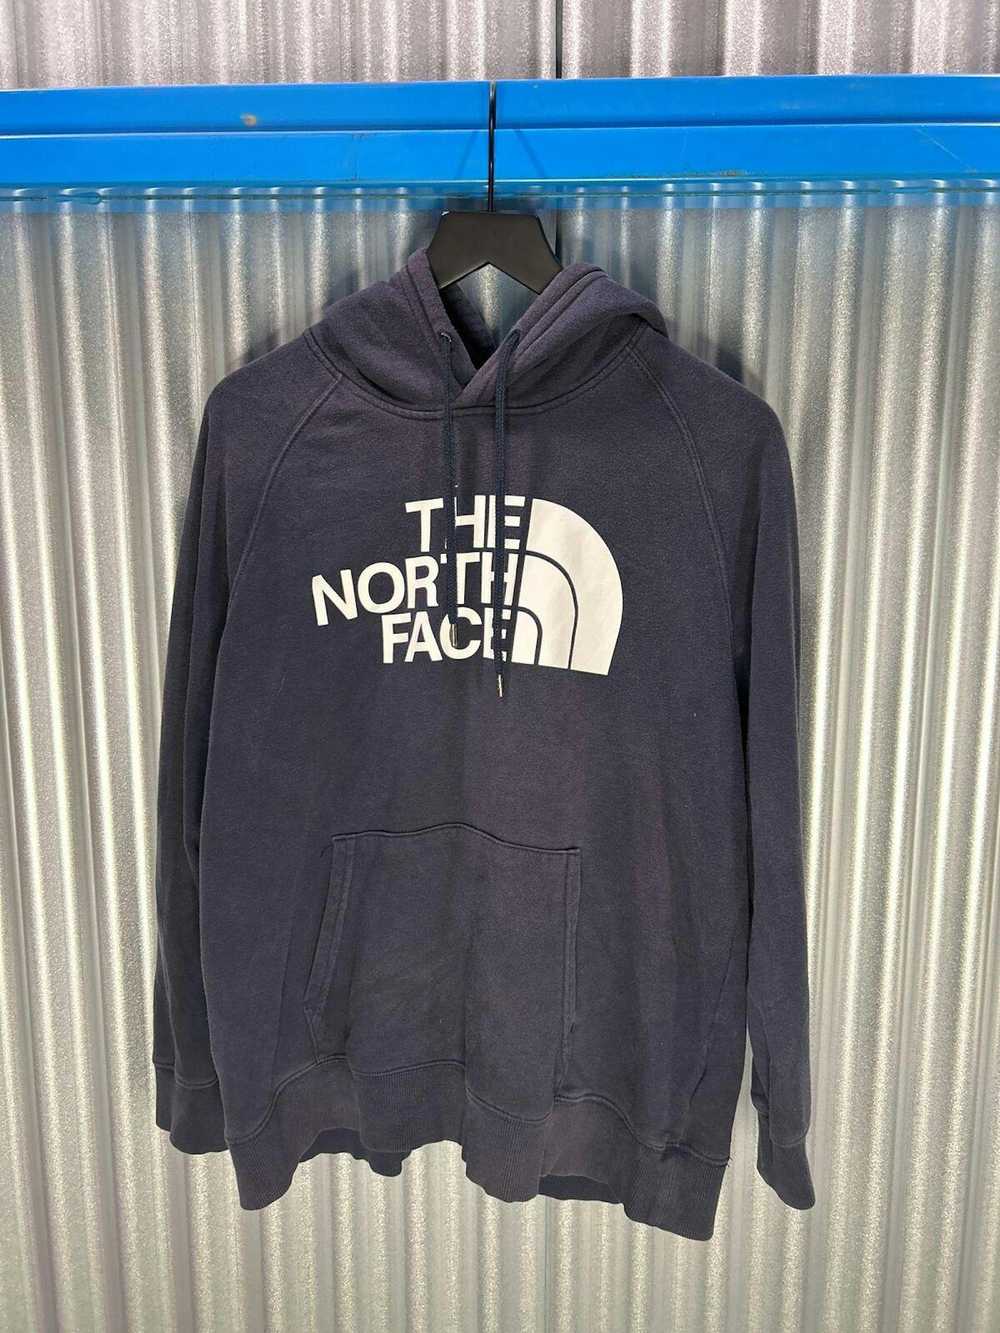 Designer The North Face Classic Navy Hoodie - image 1